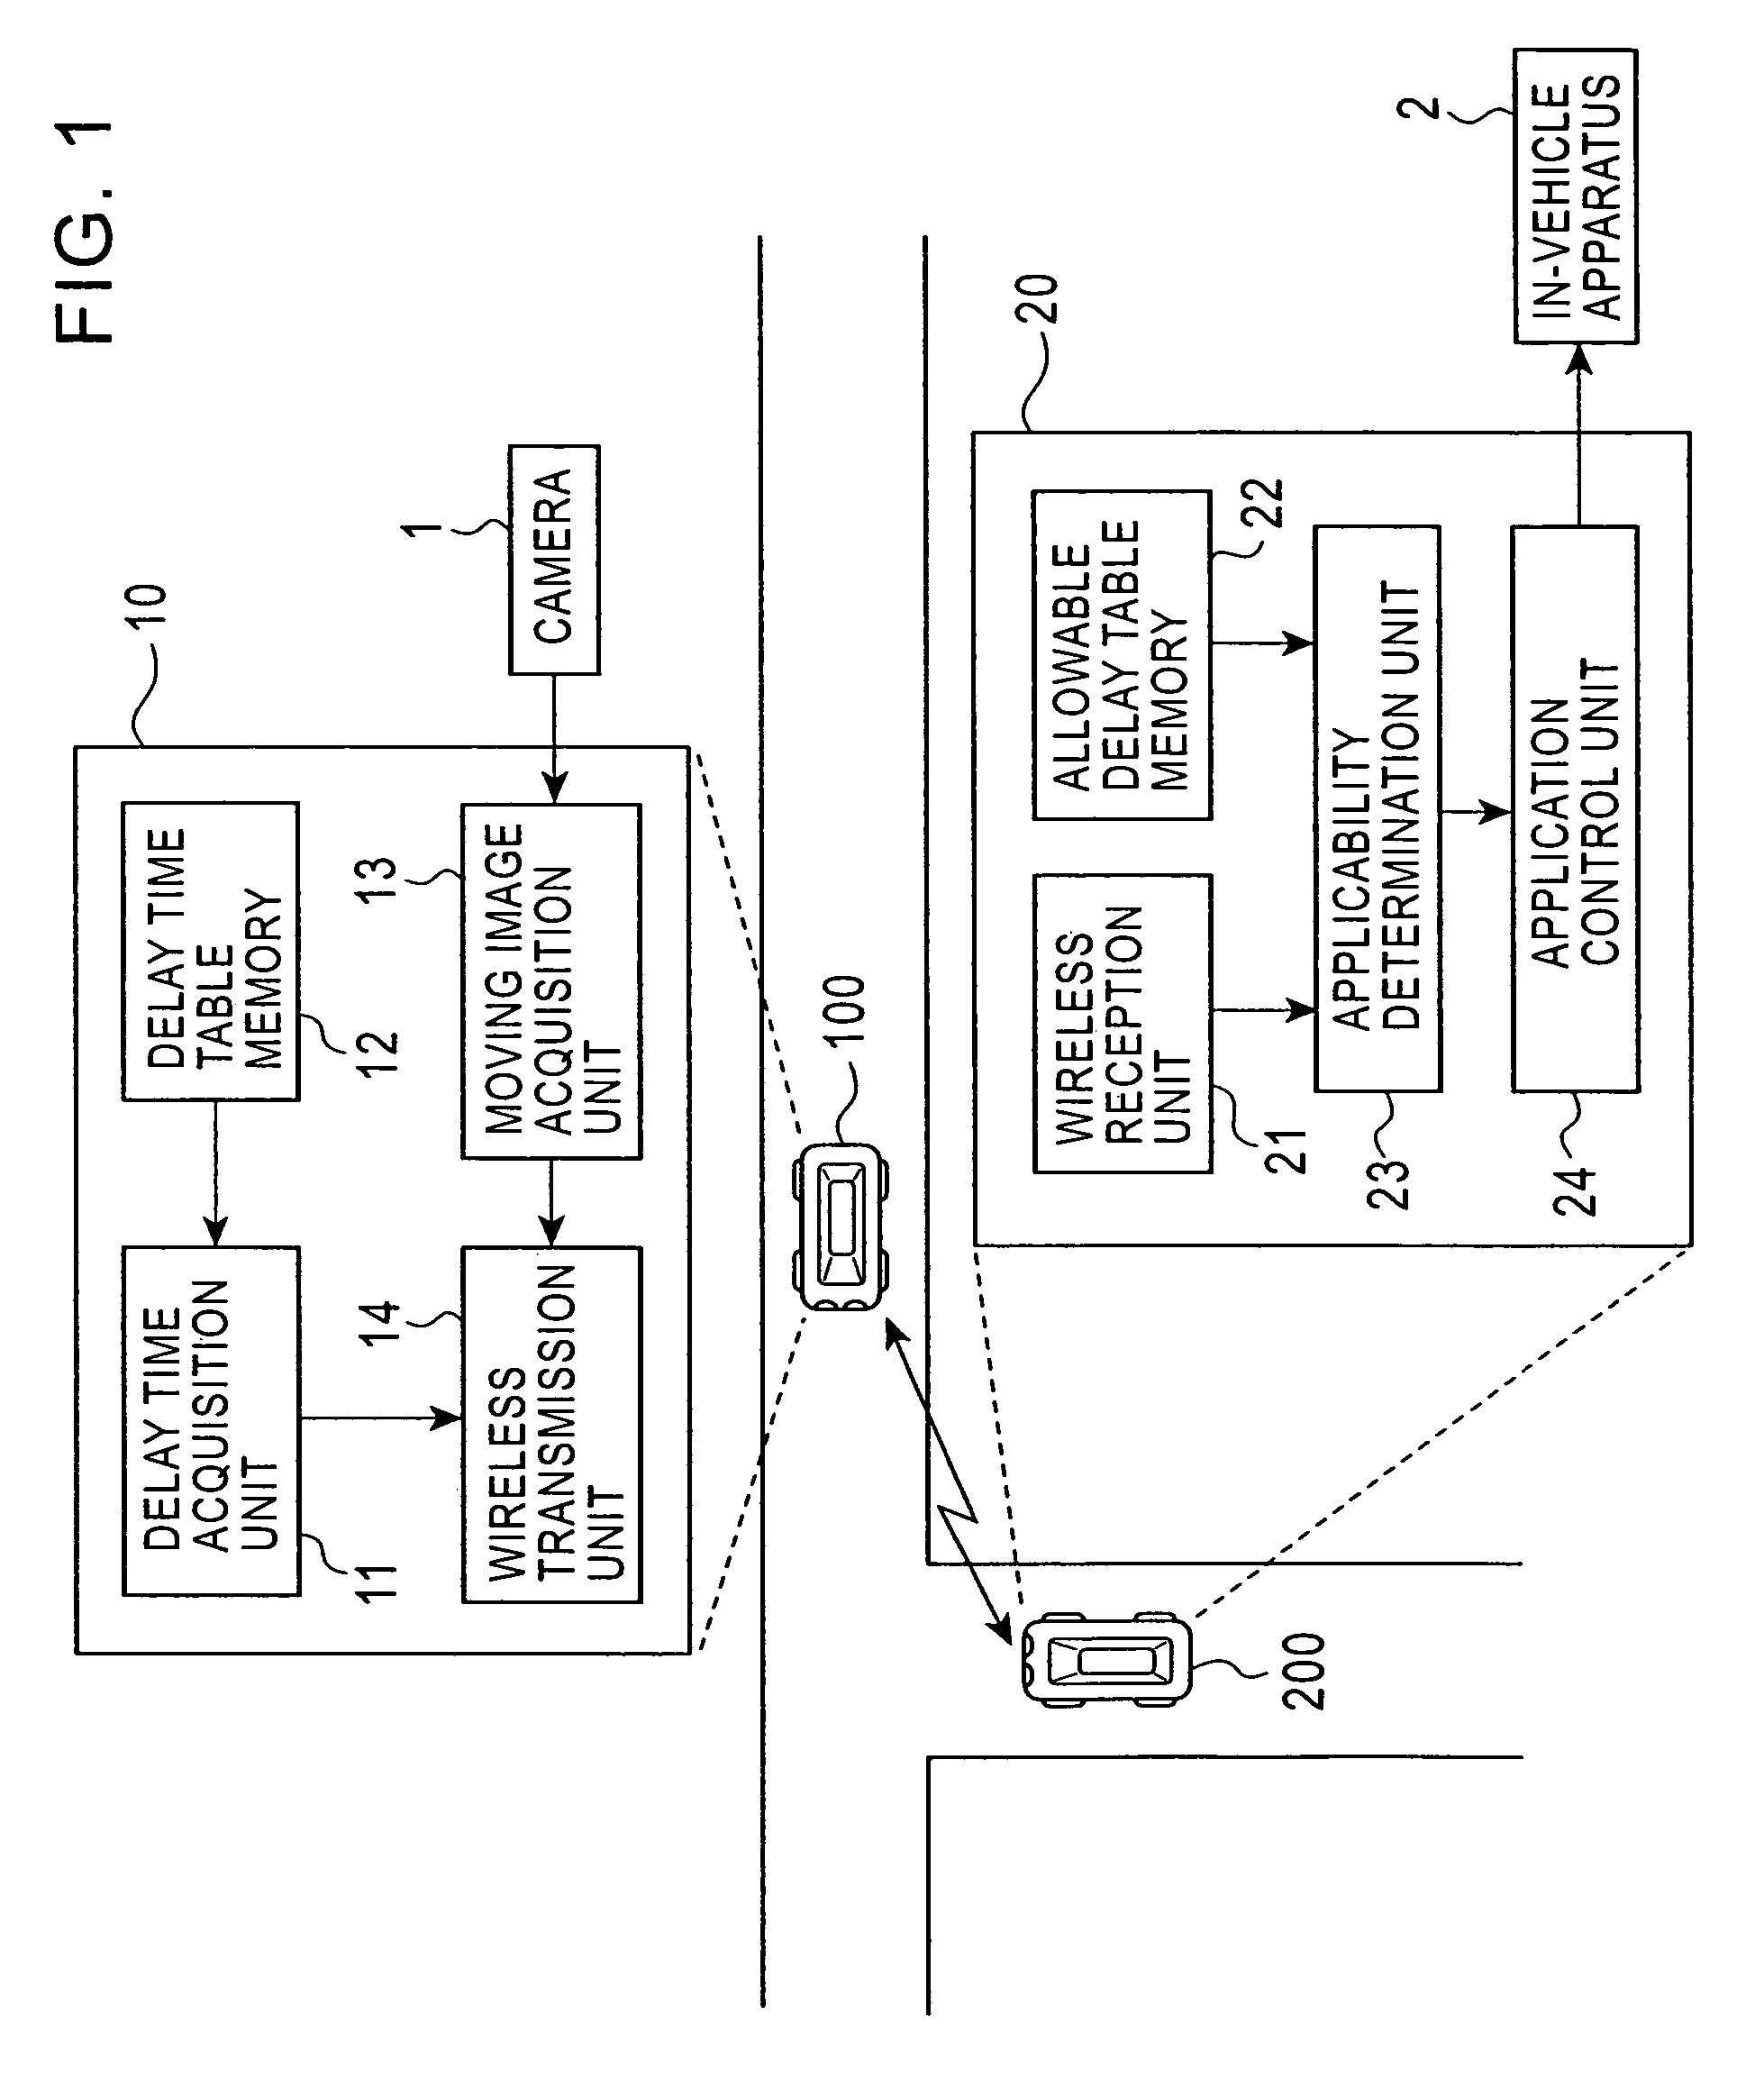 Vehicle-to-vehicle communication apparatus, vehicle-to-vehicle communication system, and method of determining applicability of moving image information to an application program